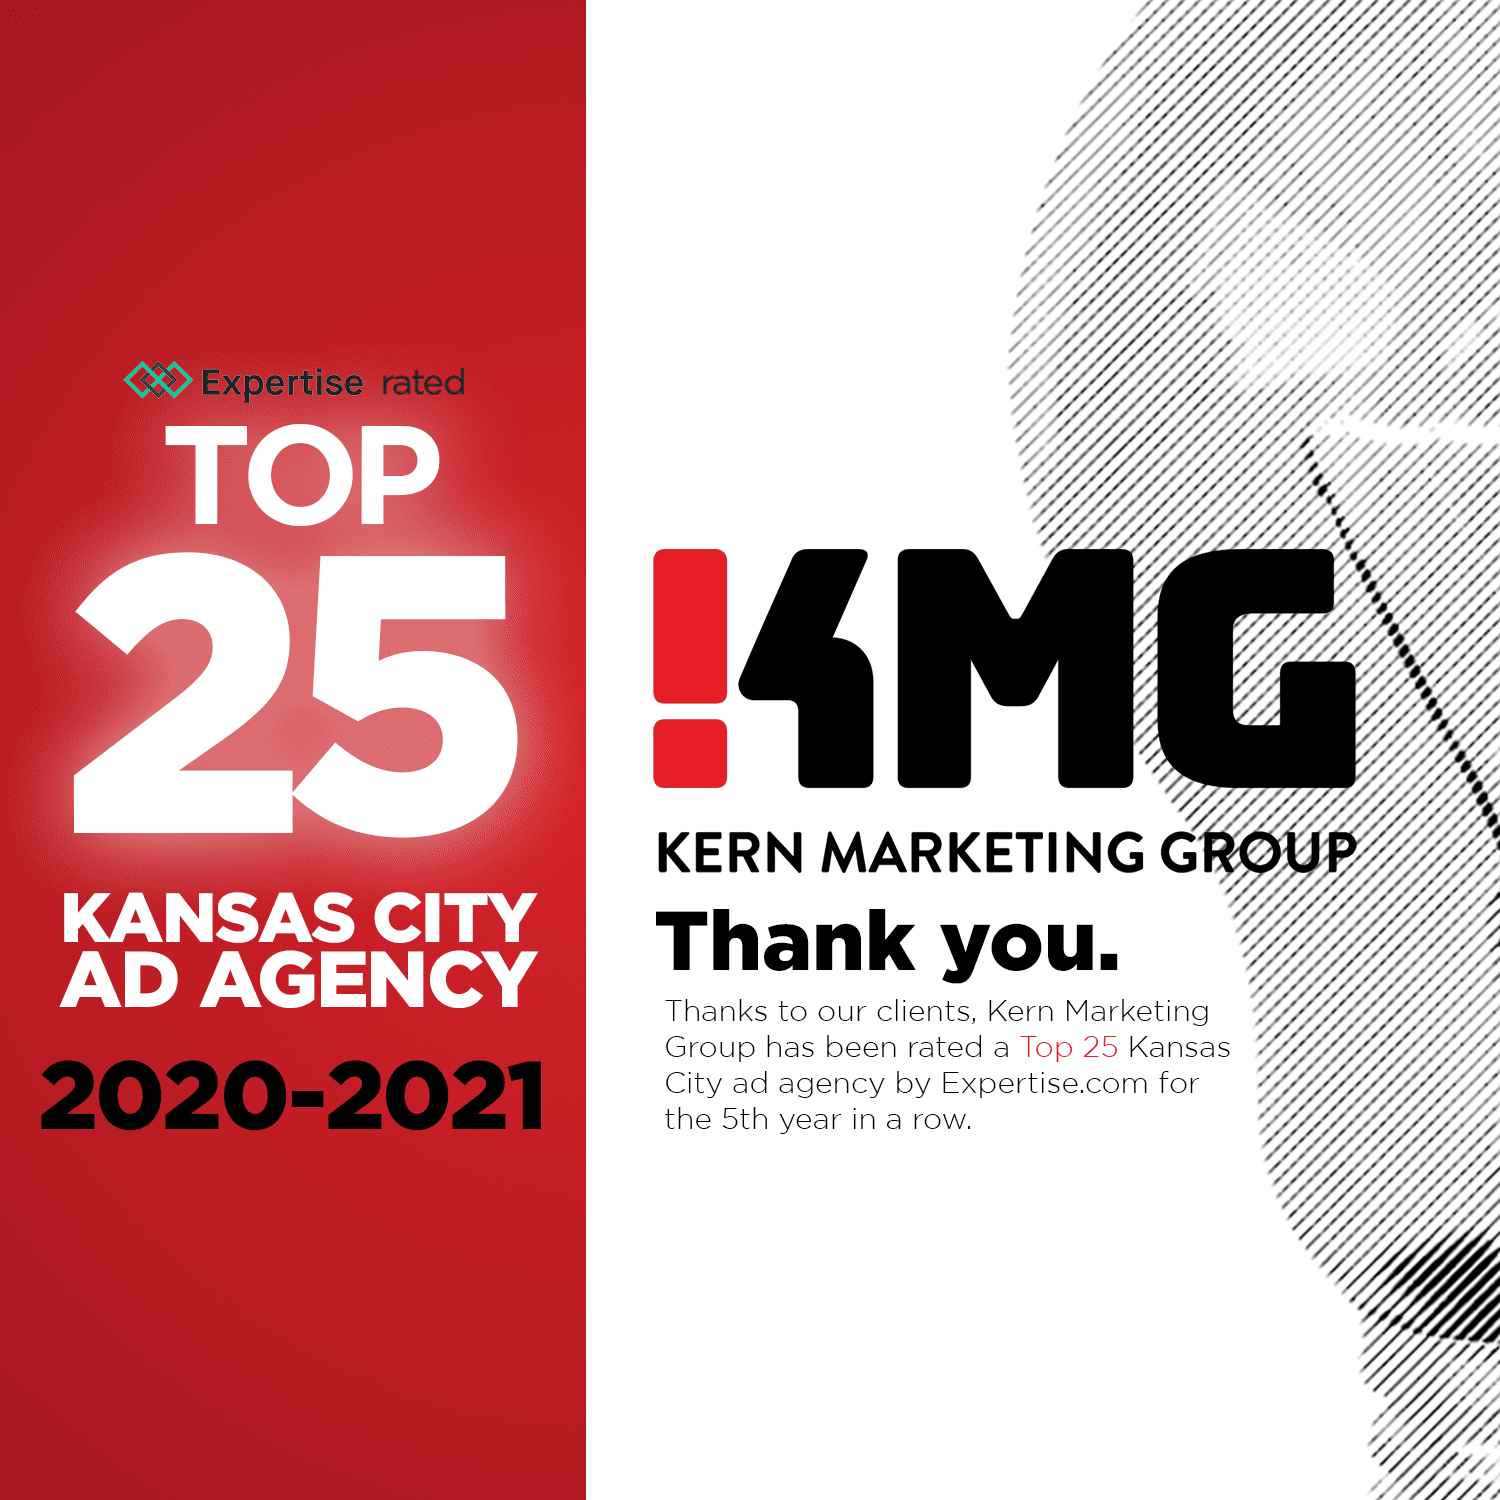 KMG Marketing Recognized as Top 25 Agency